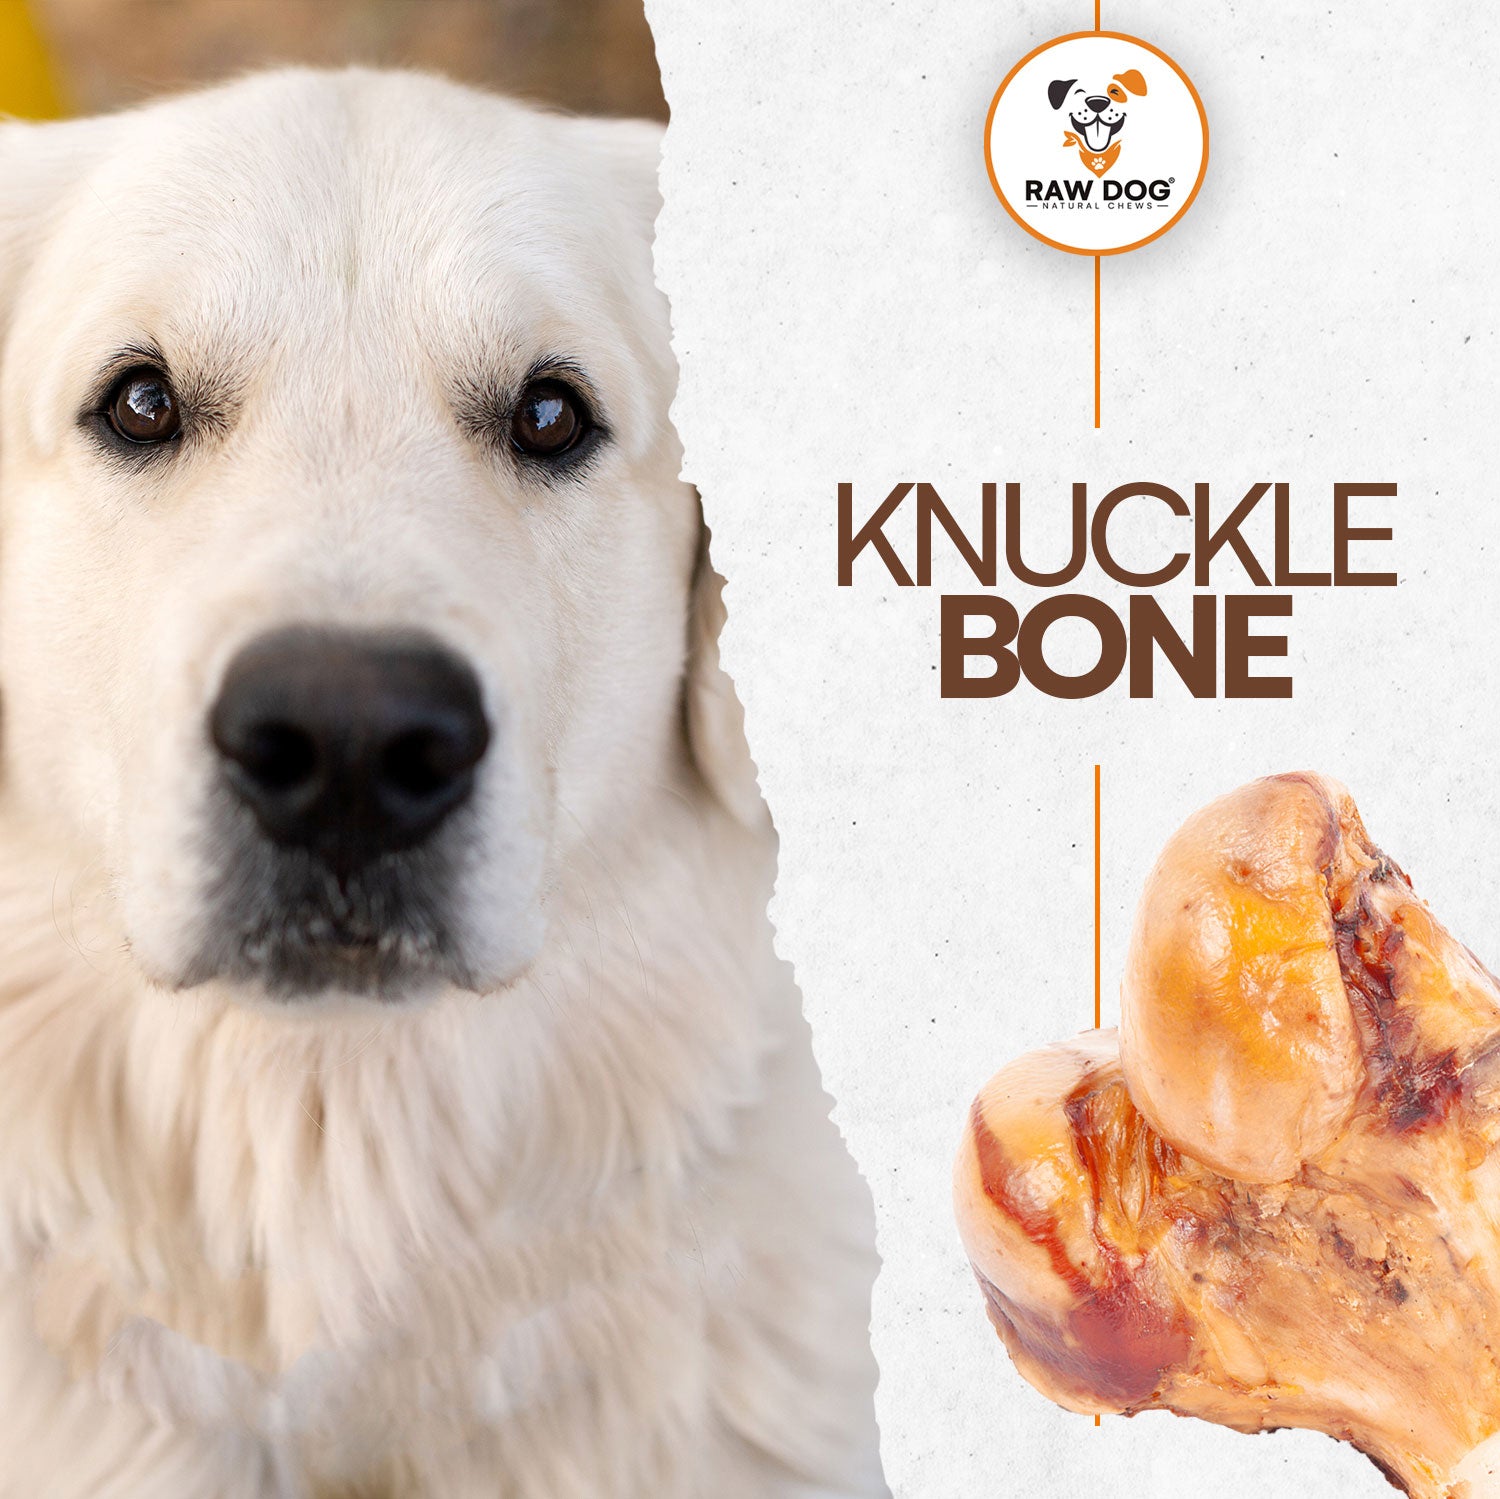 Are Raw Knuckle Bones Safe For Dogs